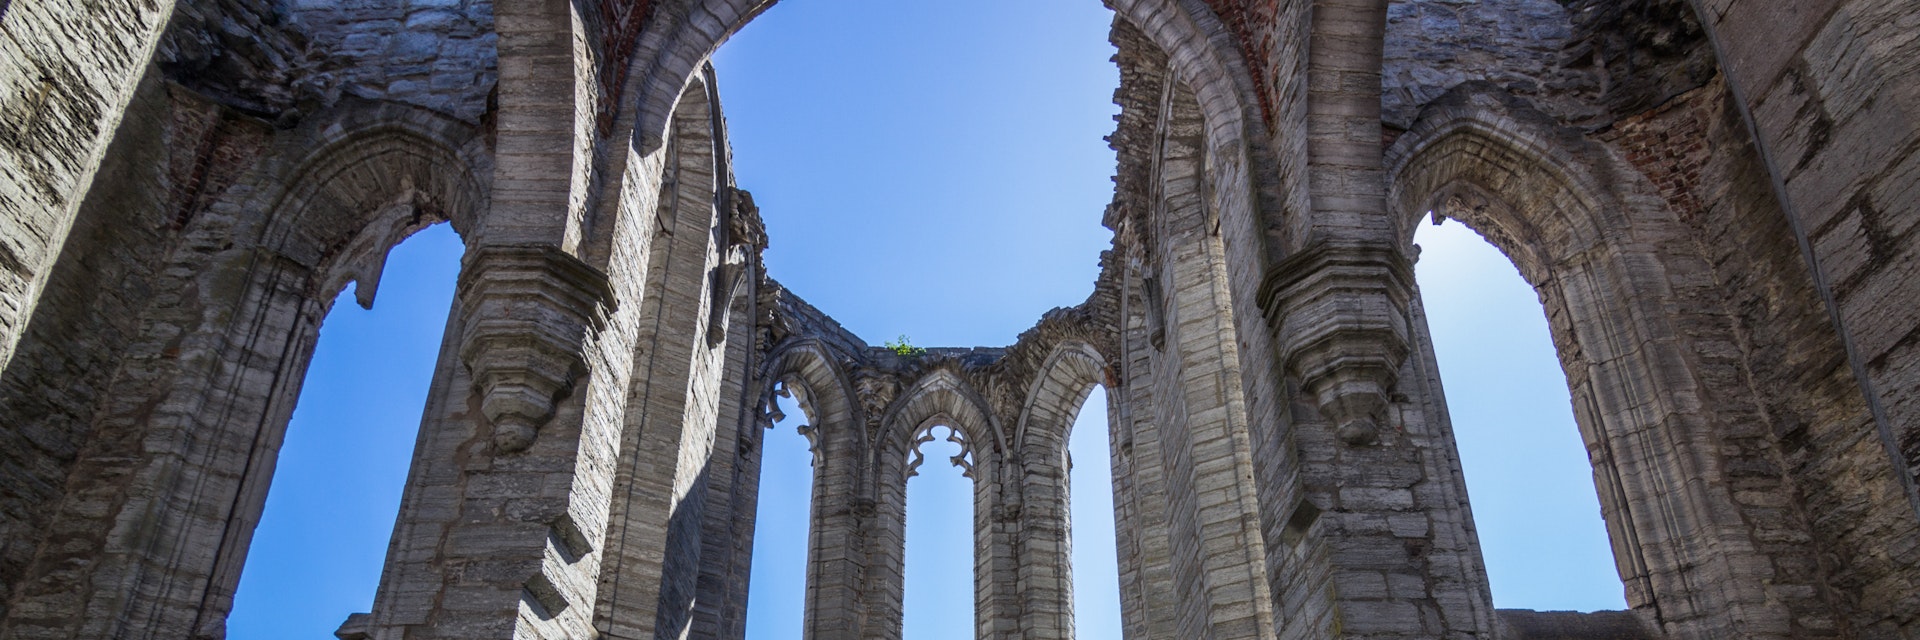 Inside the ruins of Saint Karin Cathedral in Visby, Sweden.